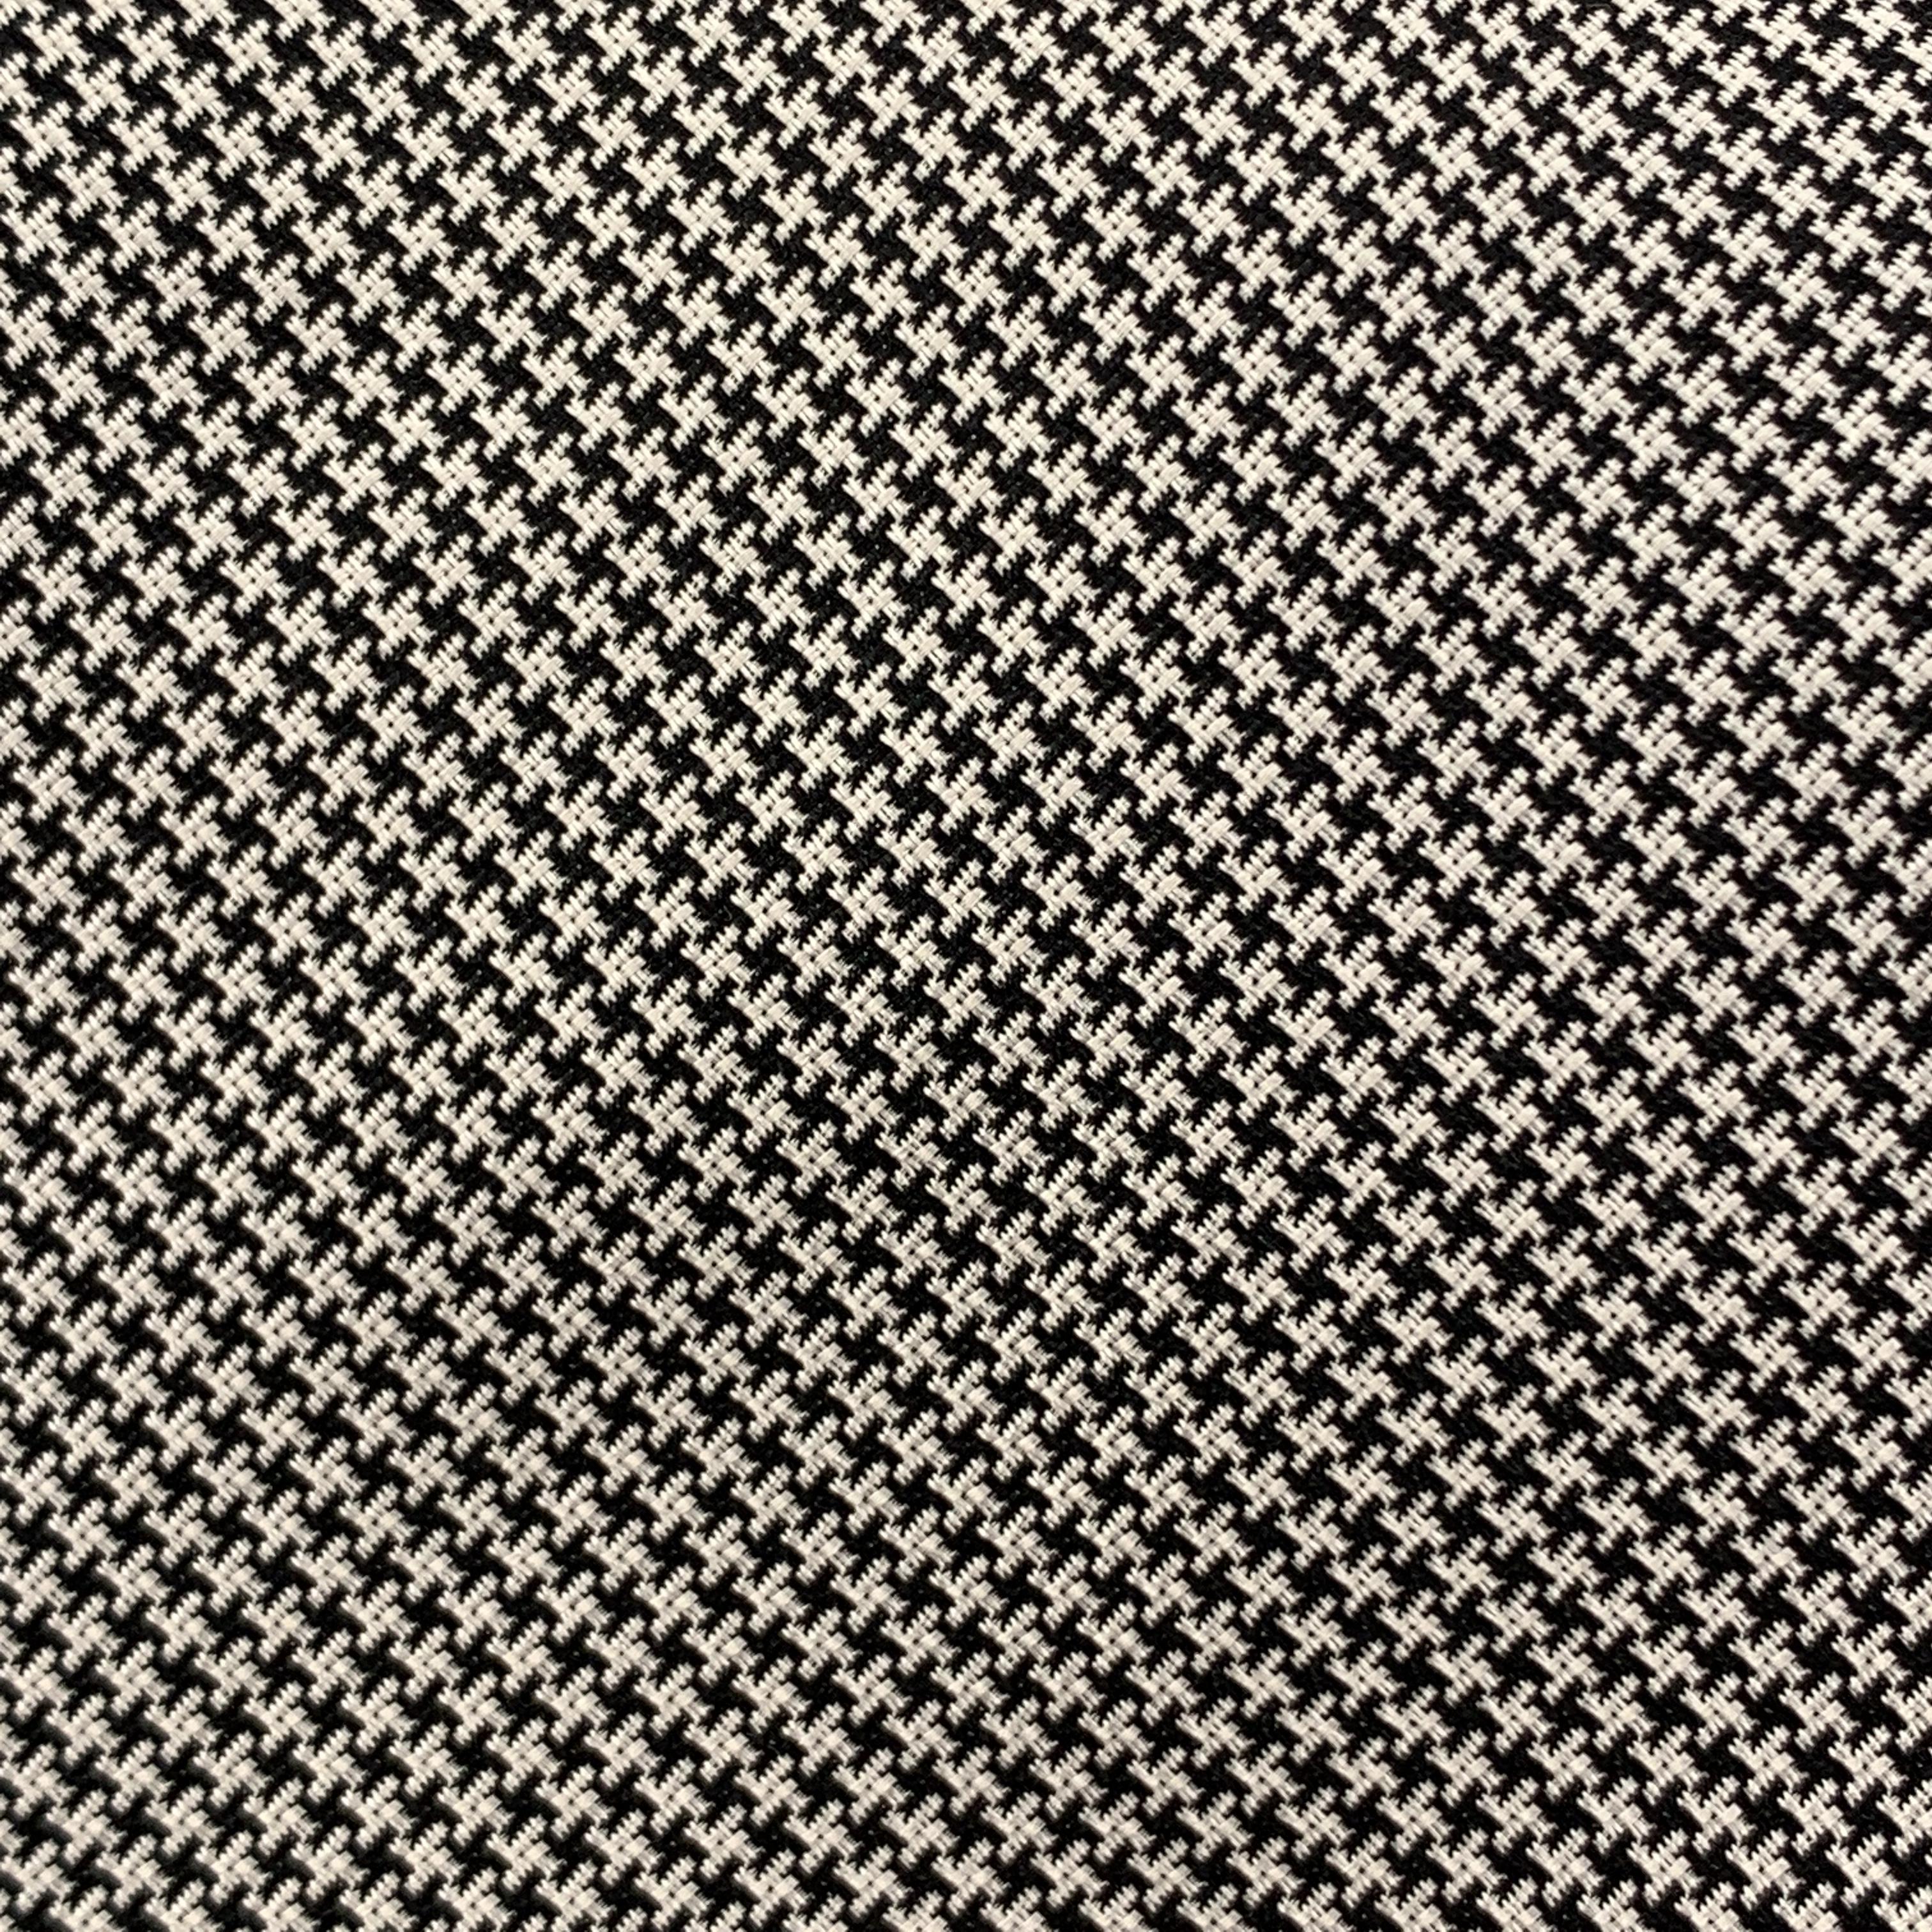 PAUL STUART necktie comes in white silk with all over deep navy houndstooth print. Made in Switzerland.

Excellent Pre-Owned Condition.

Width: 3.5 in.